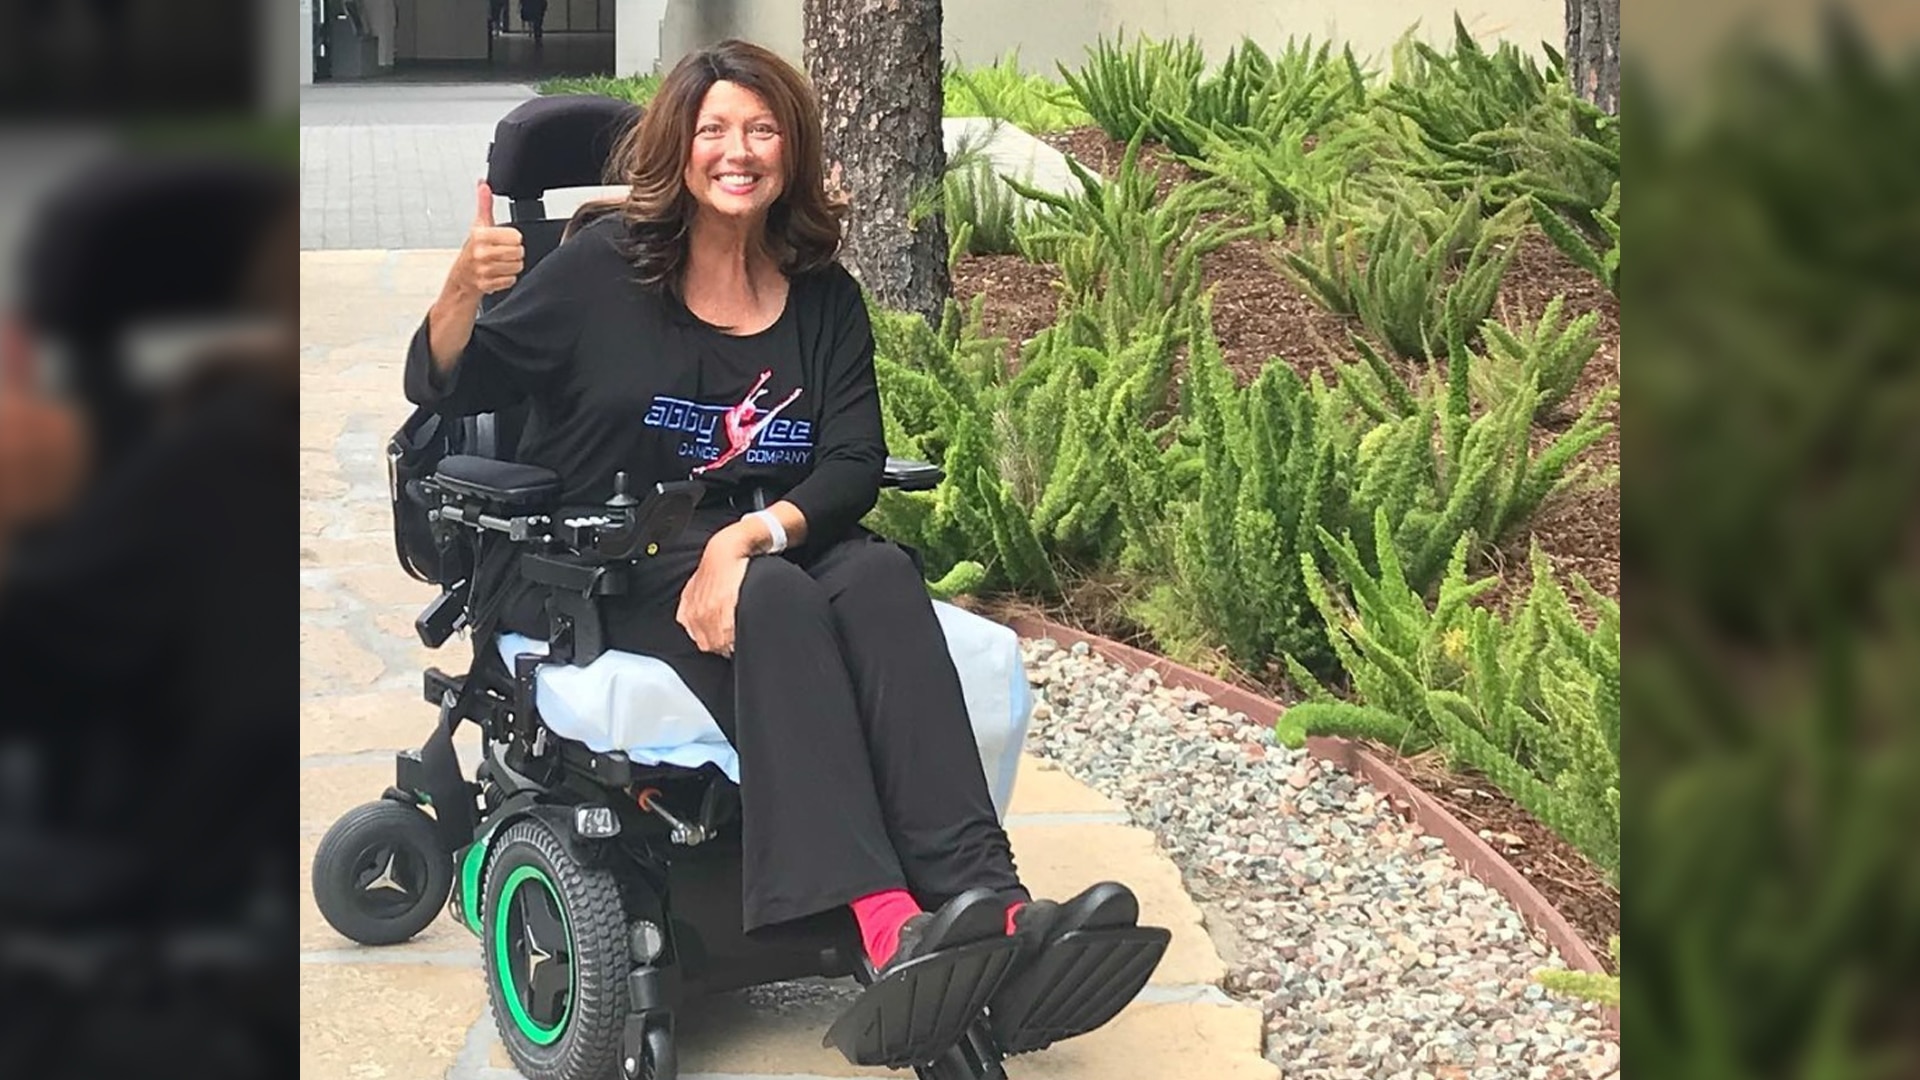 Watch Access Hollywood Interview Abby Lee Miller Remaining Positive Despite Reports That She